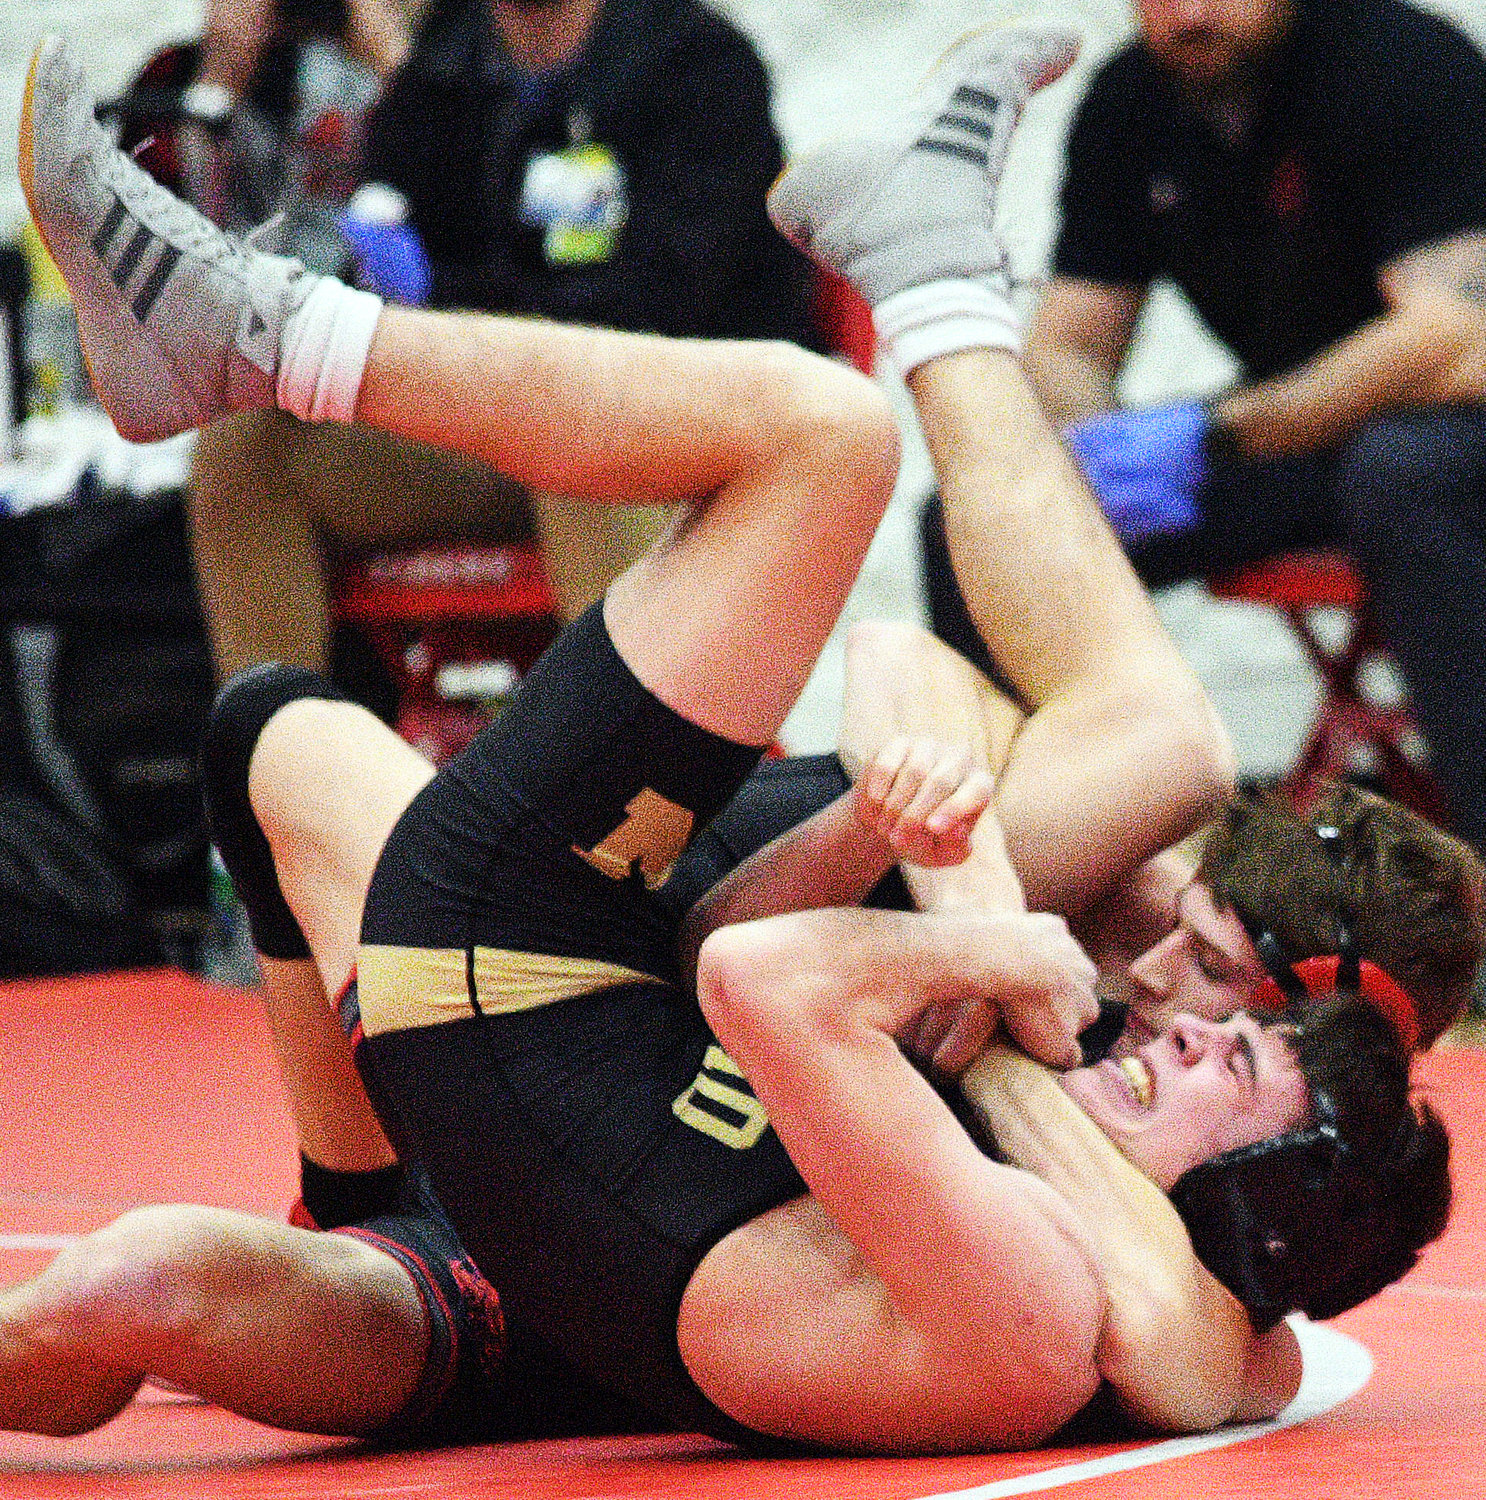 NOLAN MOELLER closes in on a fall.